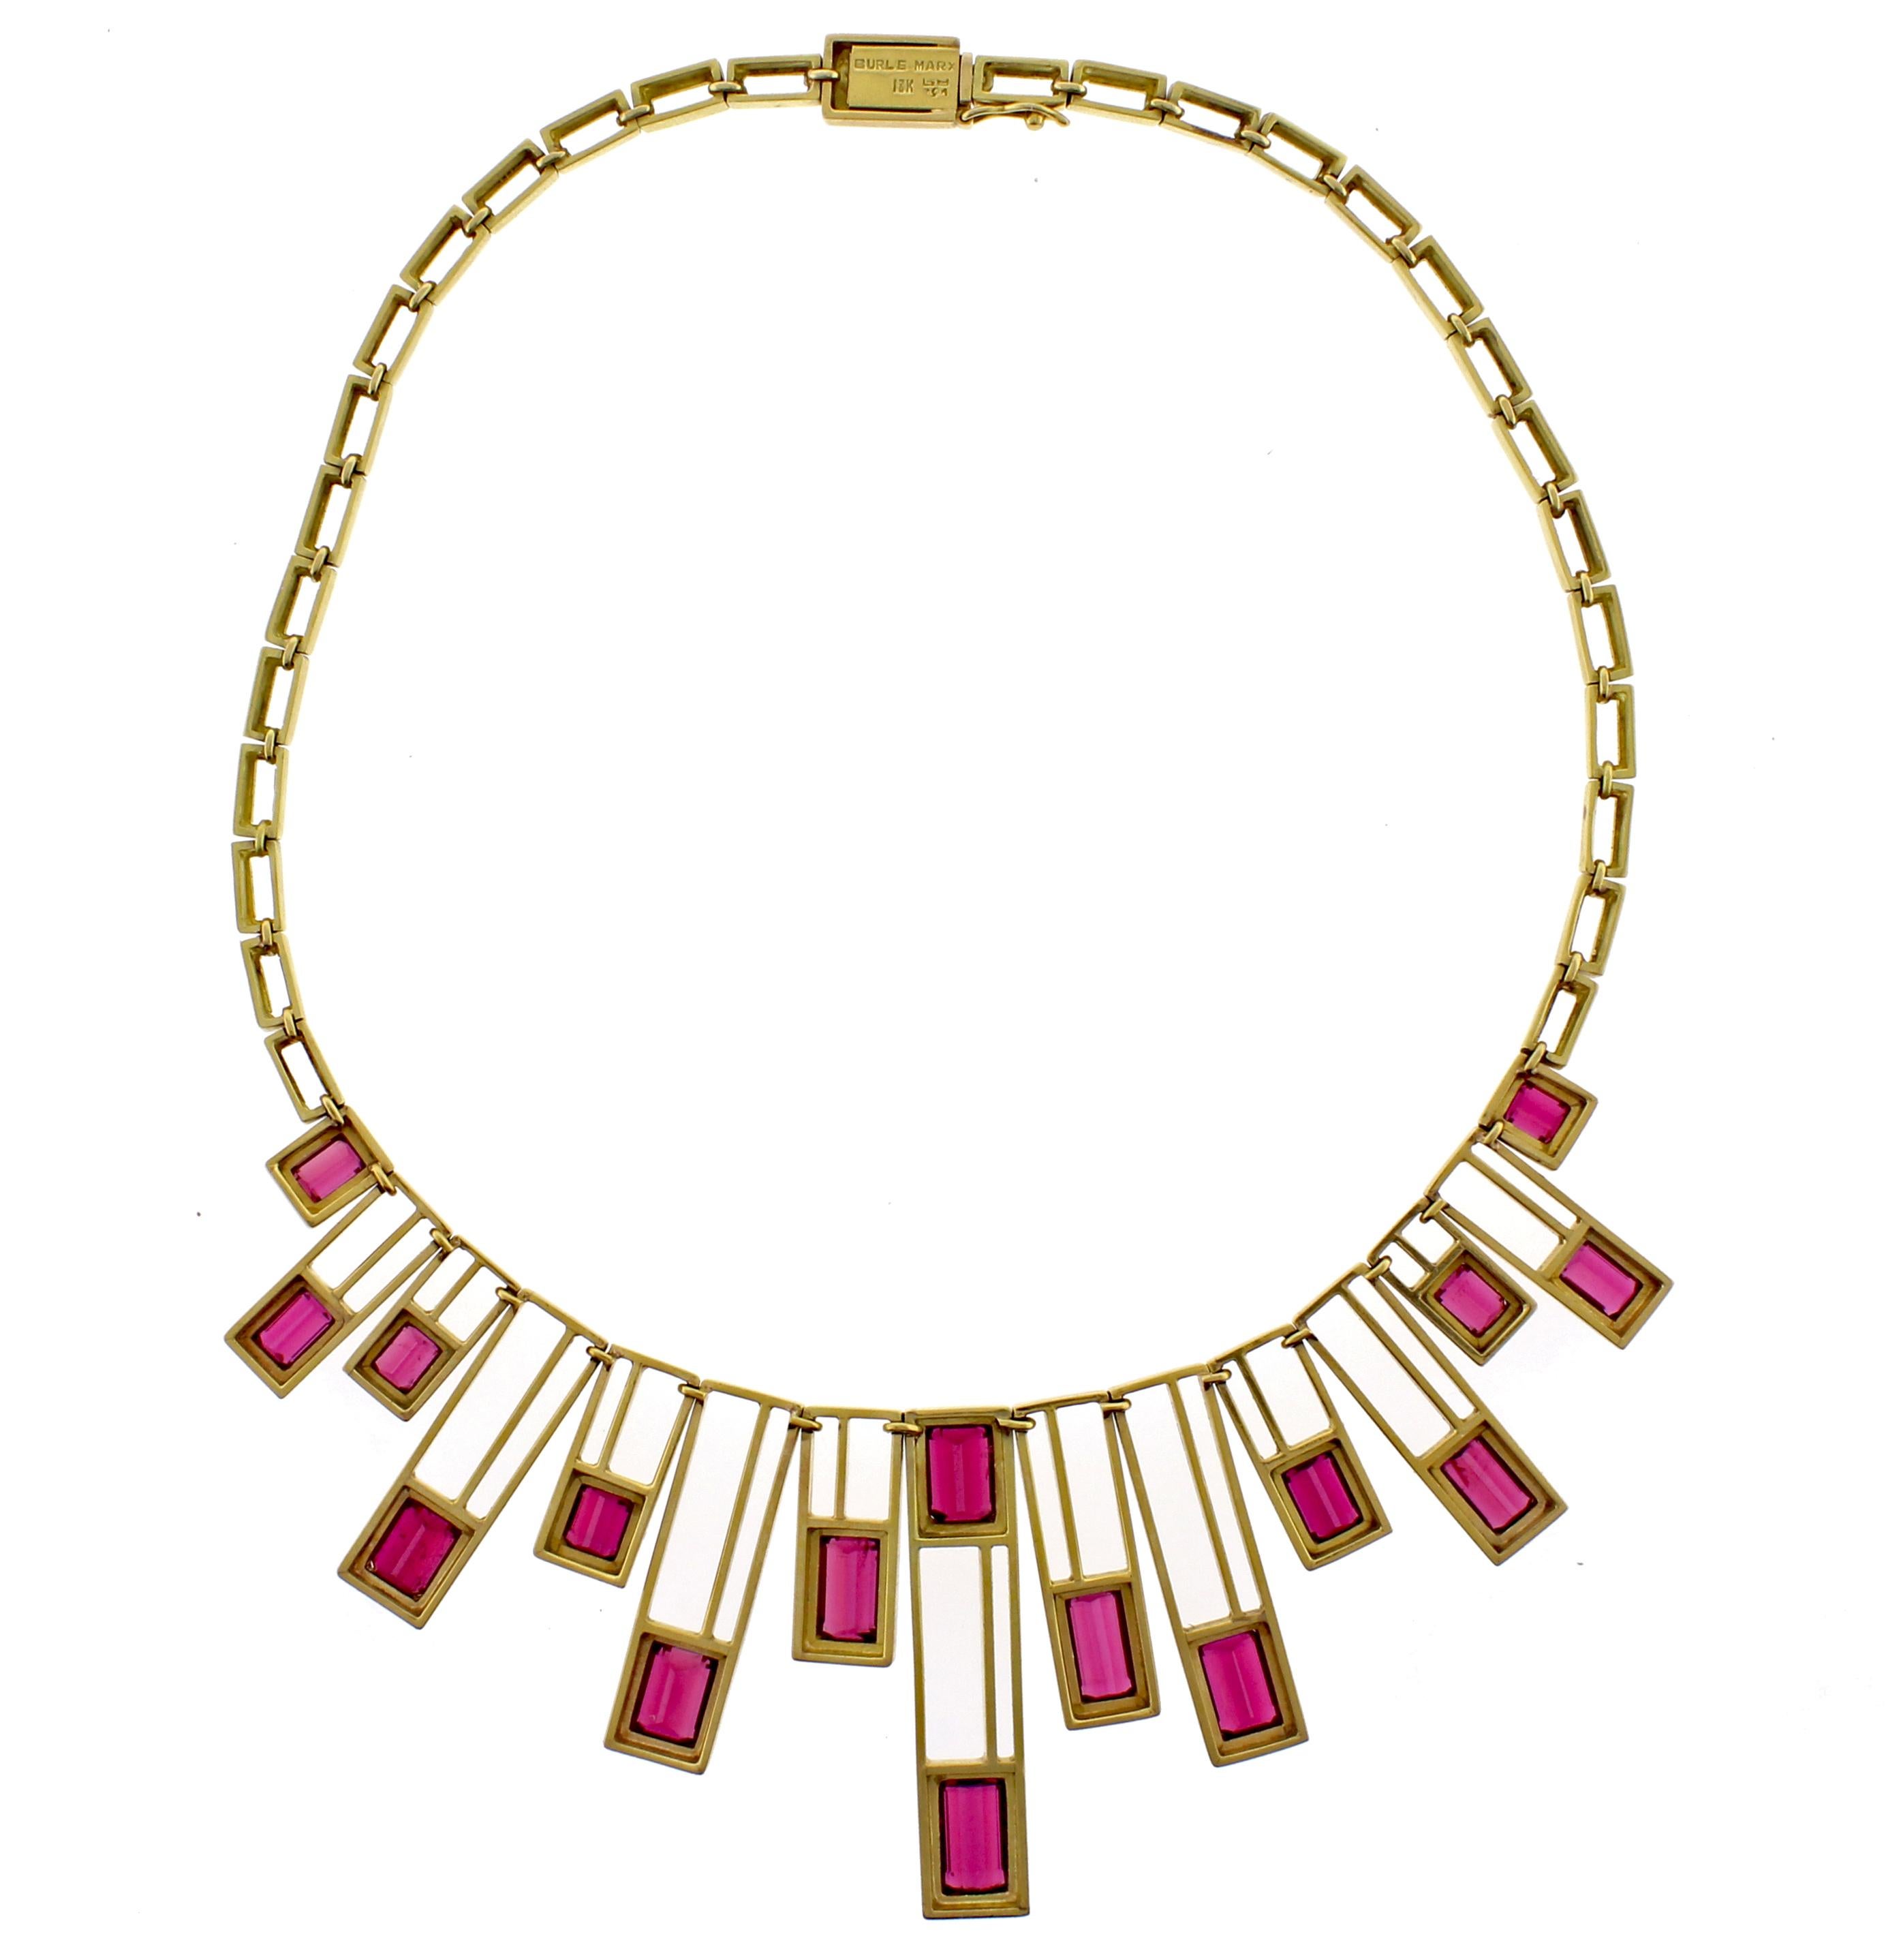 From world renowned Brazilian jeweler  Haroldo Burle Marx (1911-1991) a very special   Rubellite Tourmaline and 18 karat necklace.  The necklace features  17 gem  matched rubellites ranging from 5*4mm to 11*7mm weighing approximately  23 carats. 